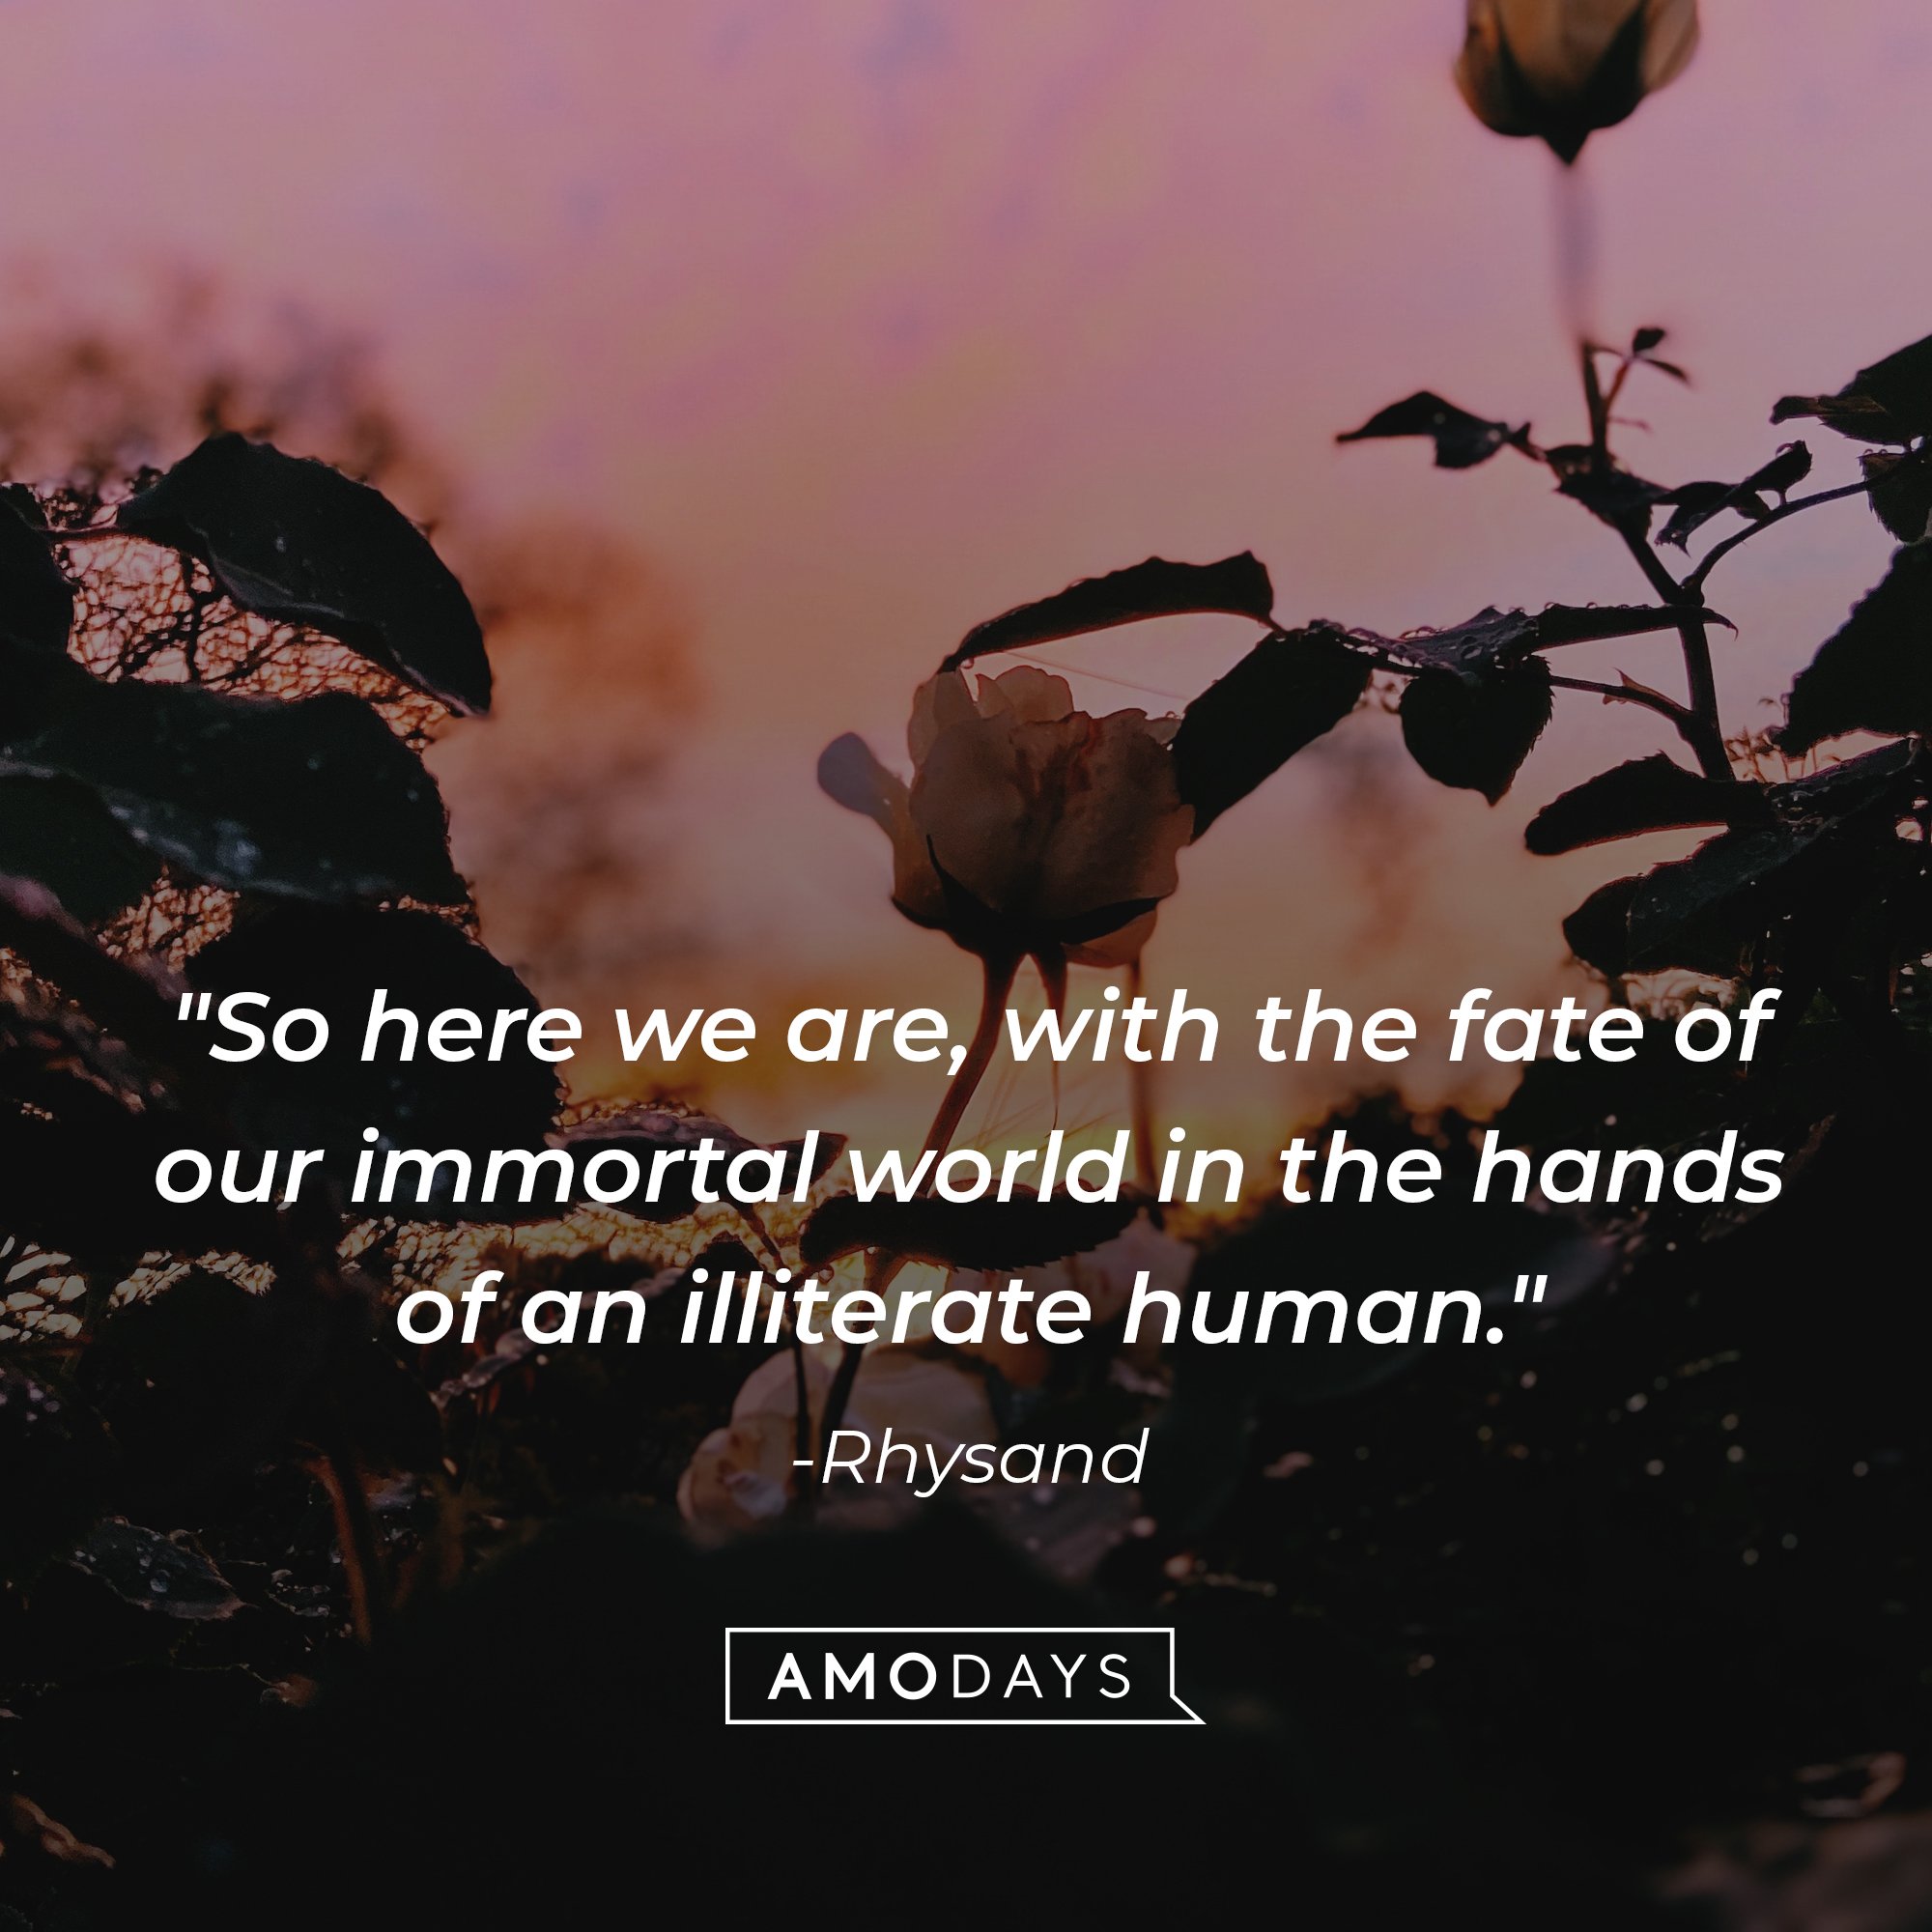 Rhysand’s quote: "So here we are, with the fate of our immortal world in the hands of an illiterate human." | Image: AmoDays